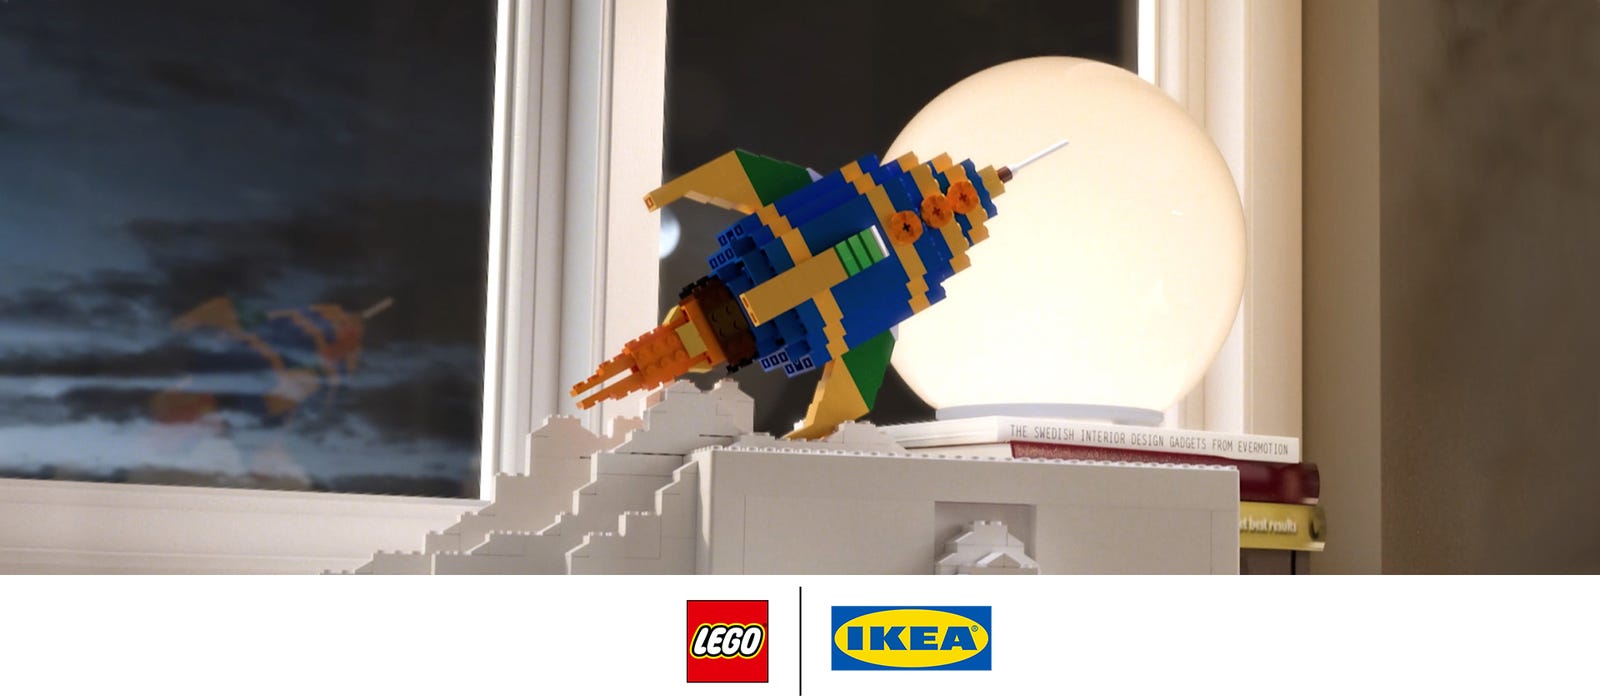 Universal Products & Experiences x The LEGO Group Launch